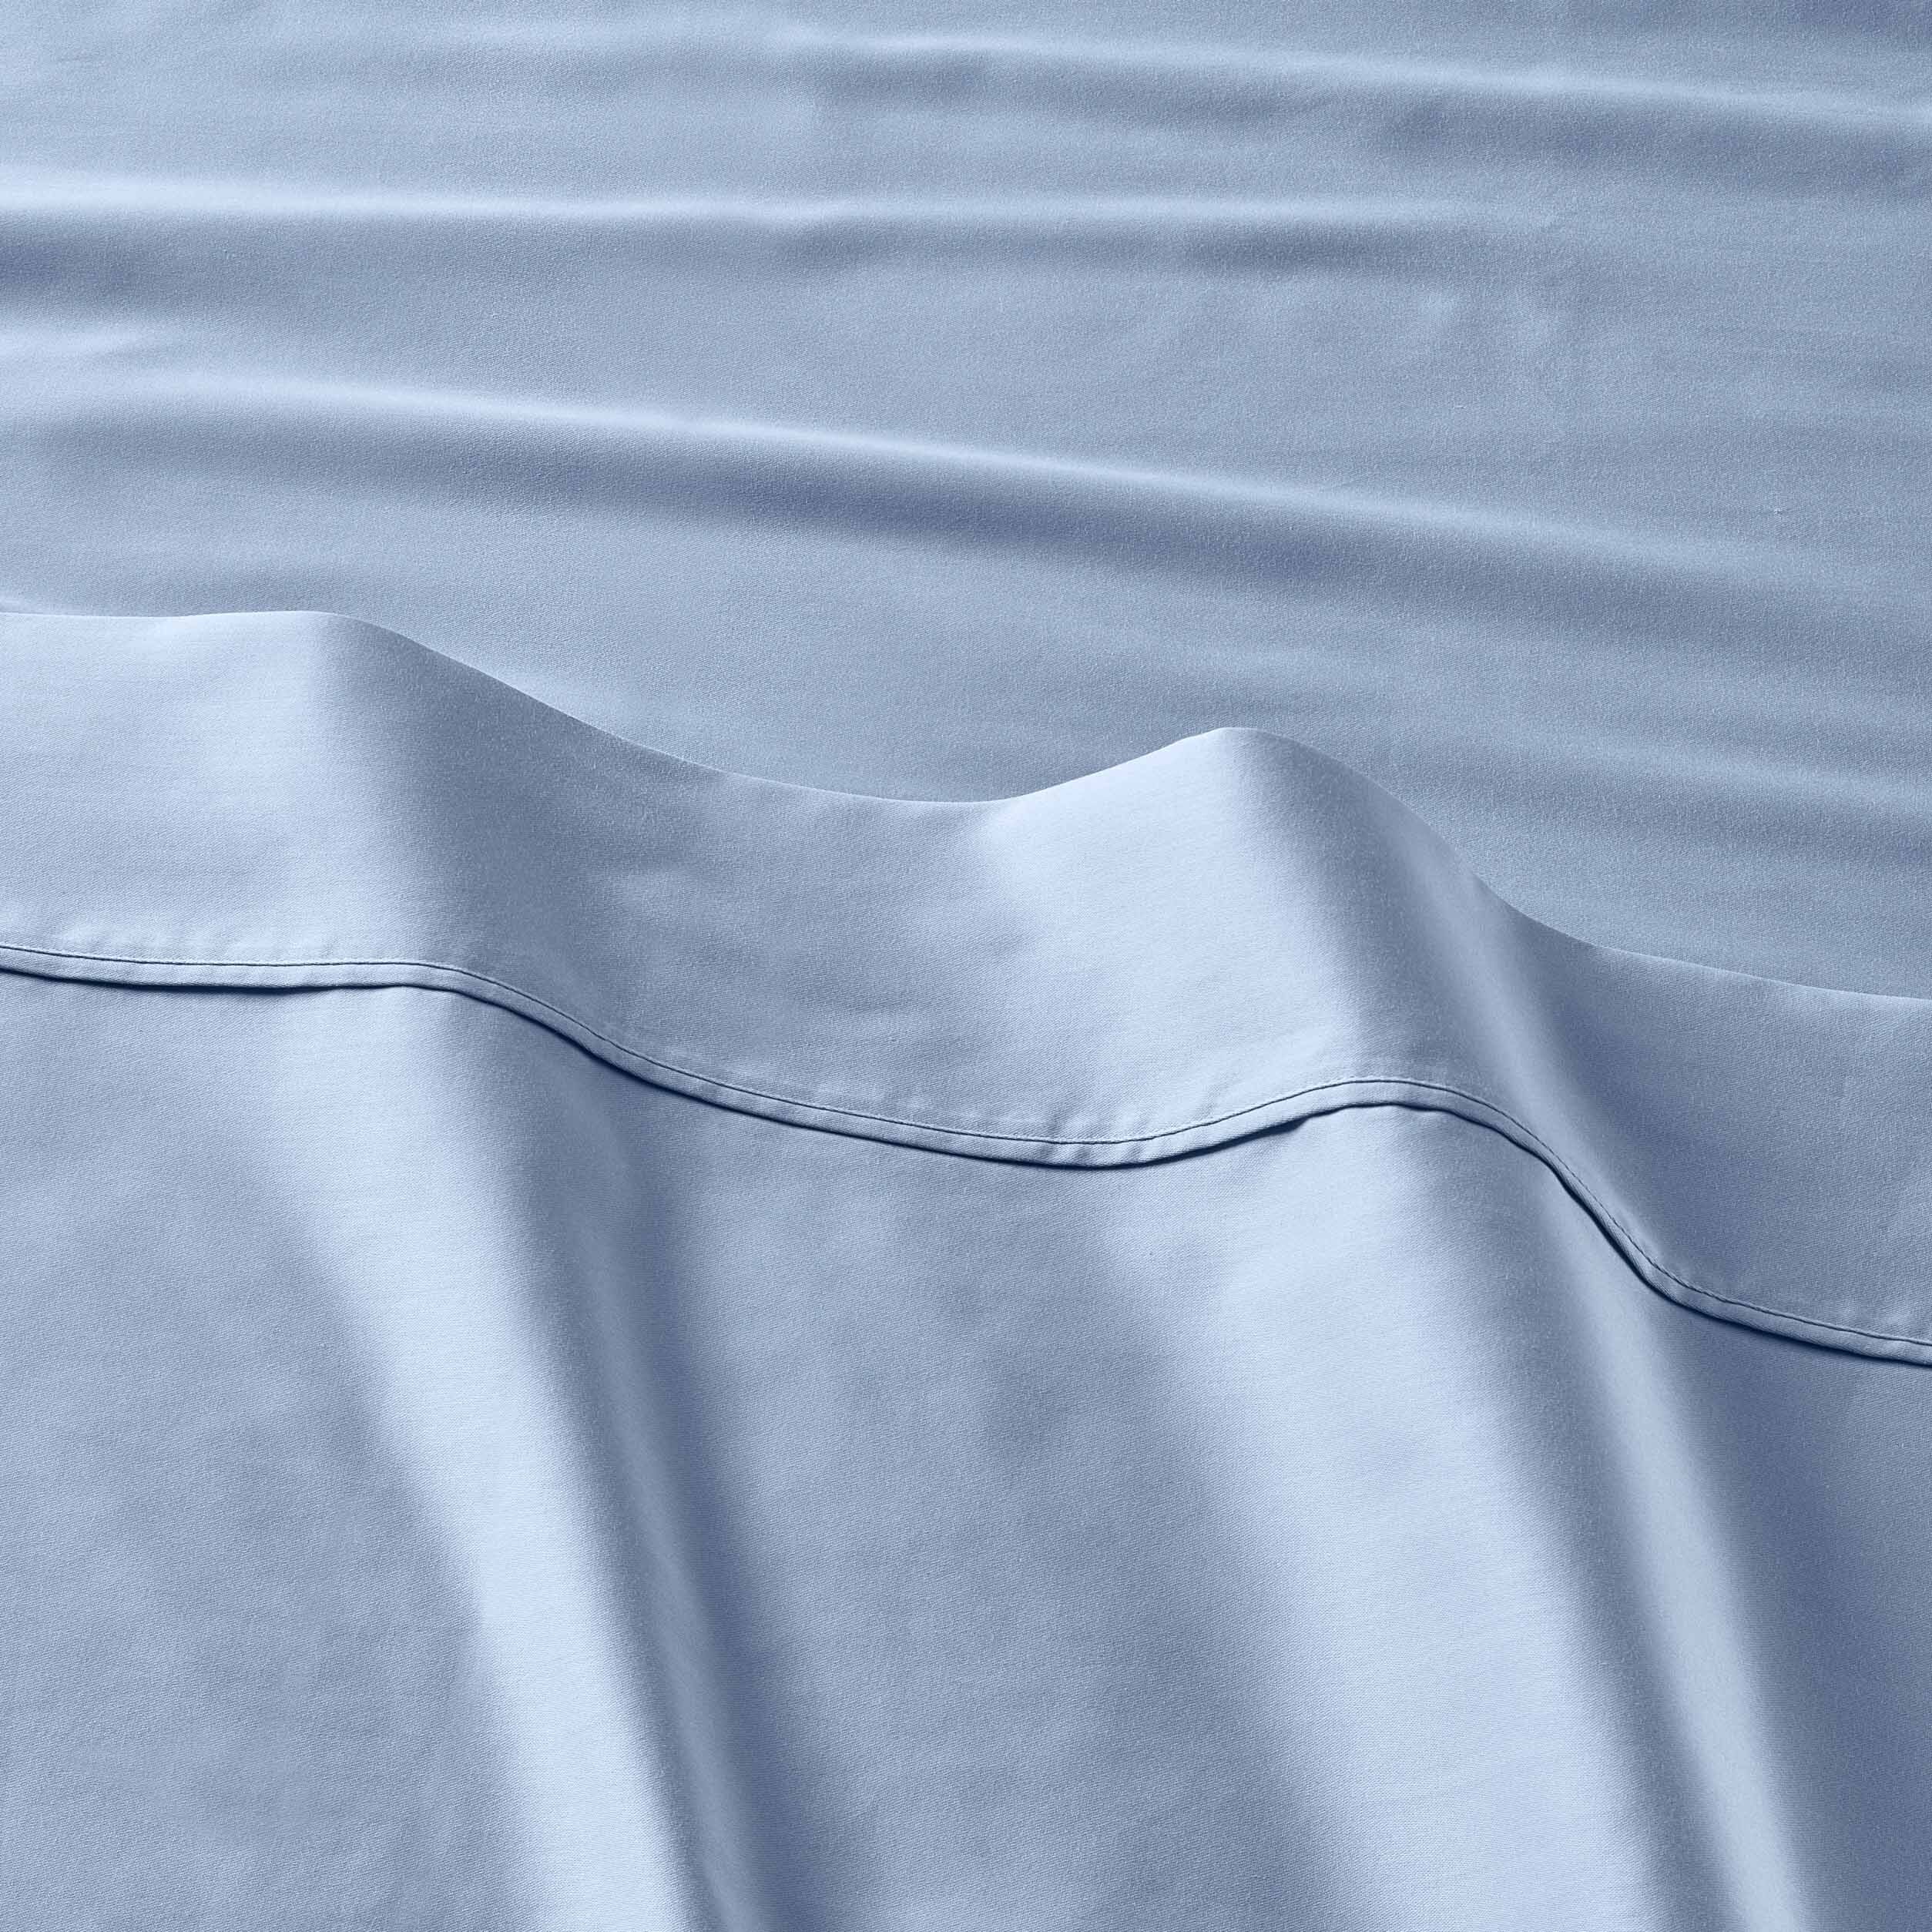 Better Homes & Gardens 100% Cotton Sateen 300 Thread Count Sheet Set, Full, Blue Water - image 4 of 6